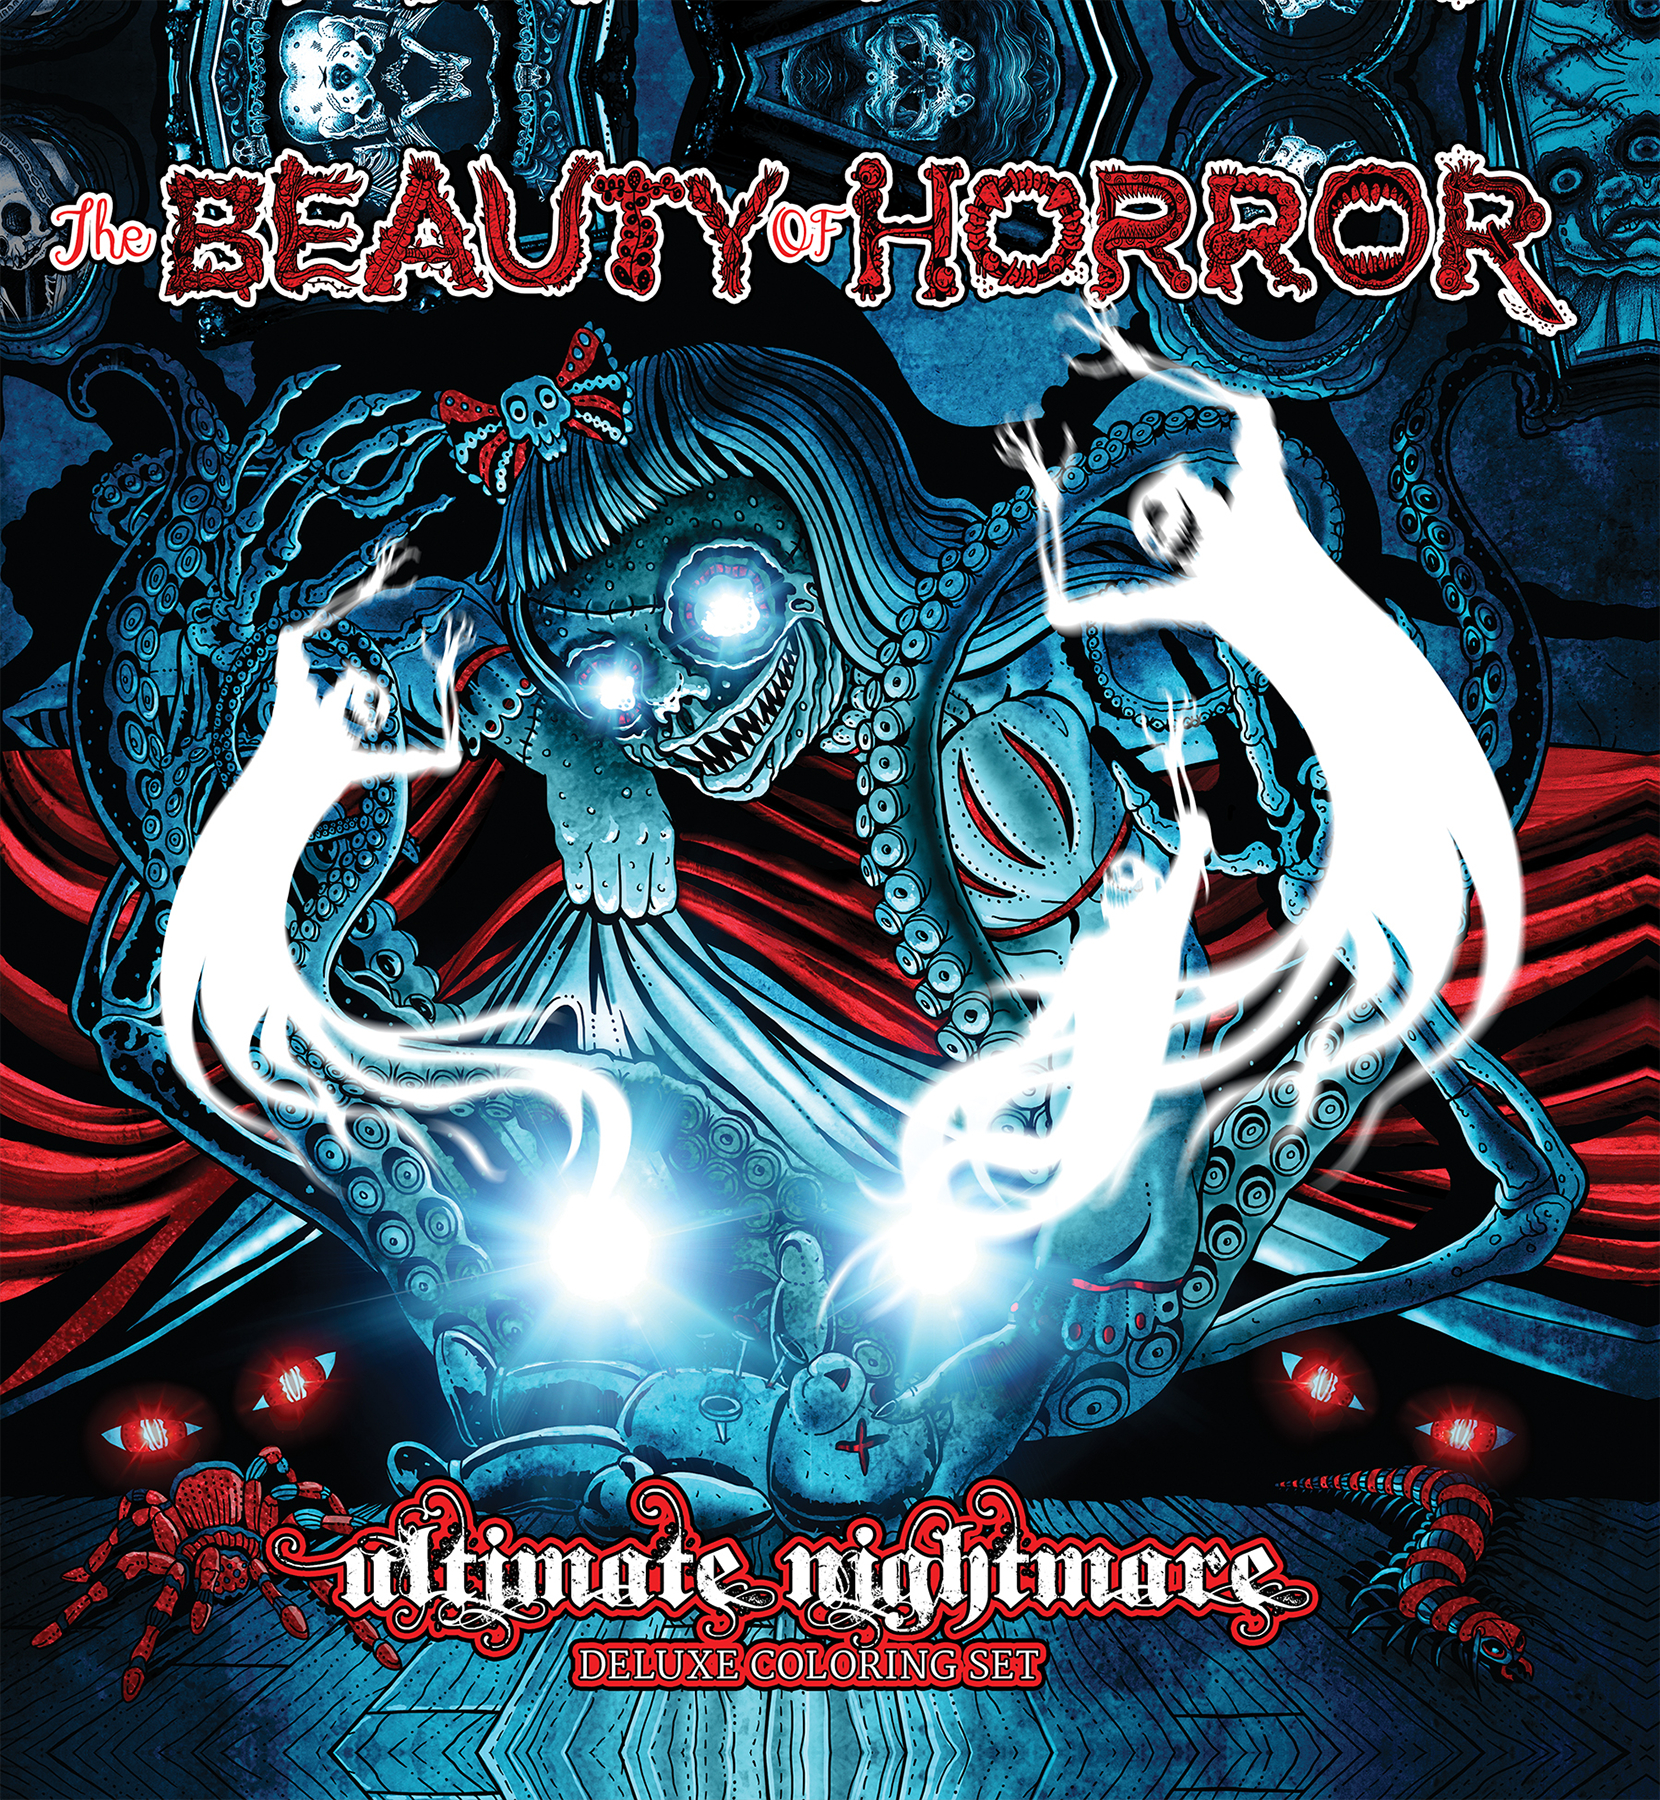 BEAUTY OF HORROR ULT NIGHTMARE DLX COLORING SET